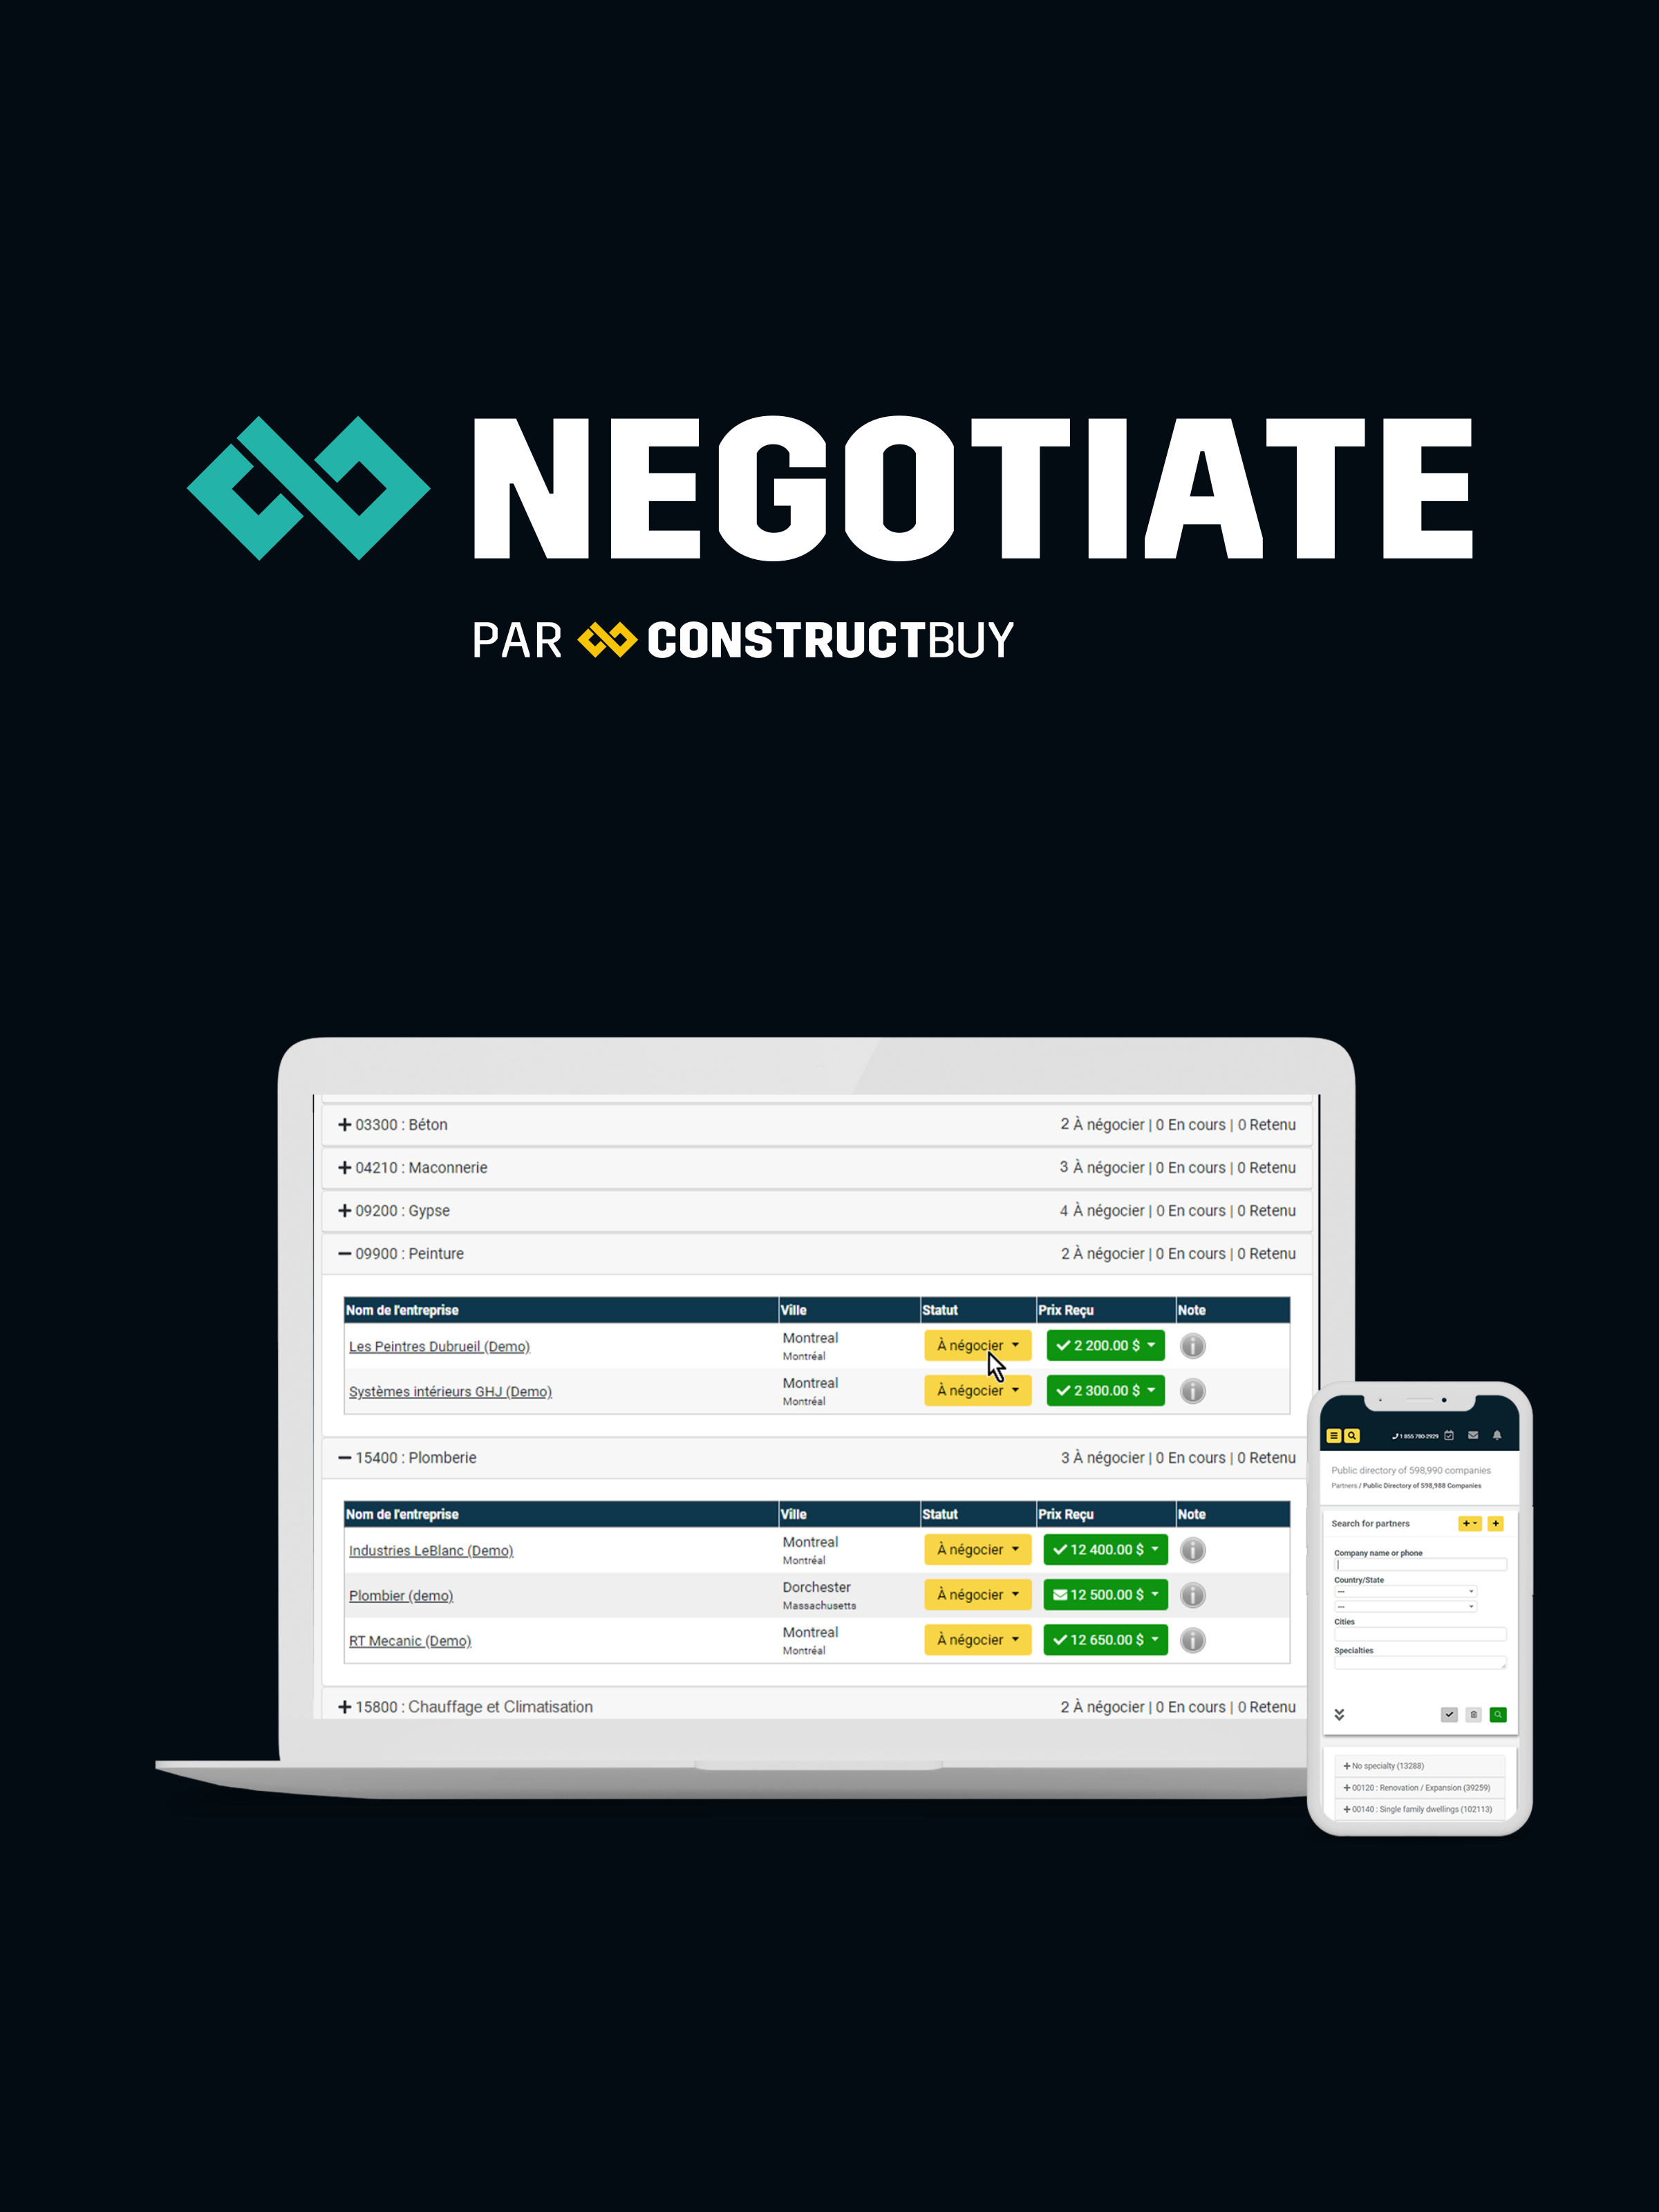 Tool to improve negotiation process among suppliers and bidders. Easily track the progress of your negotiations with the contractors and suppliers bidding on your projects.